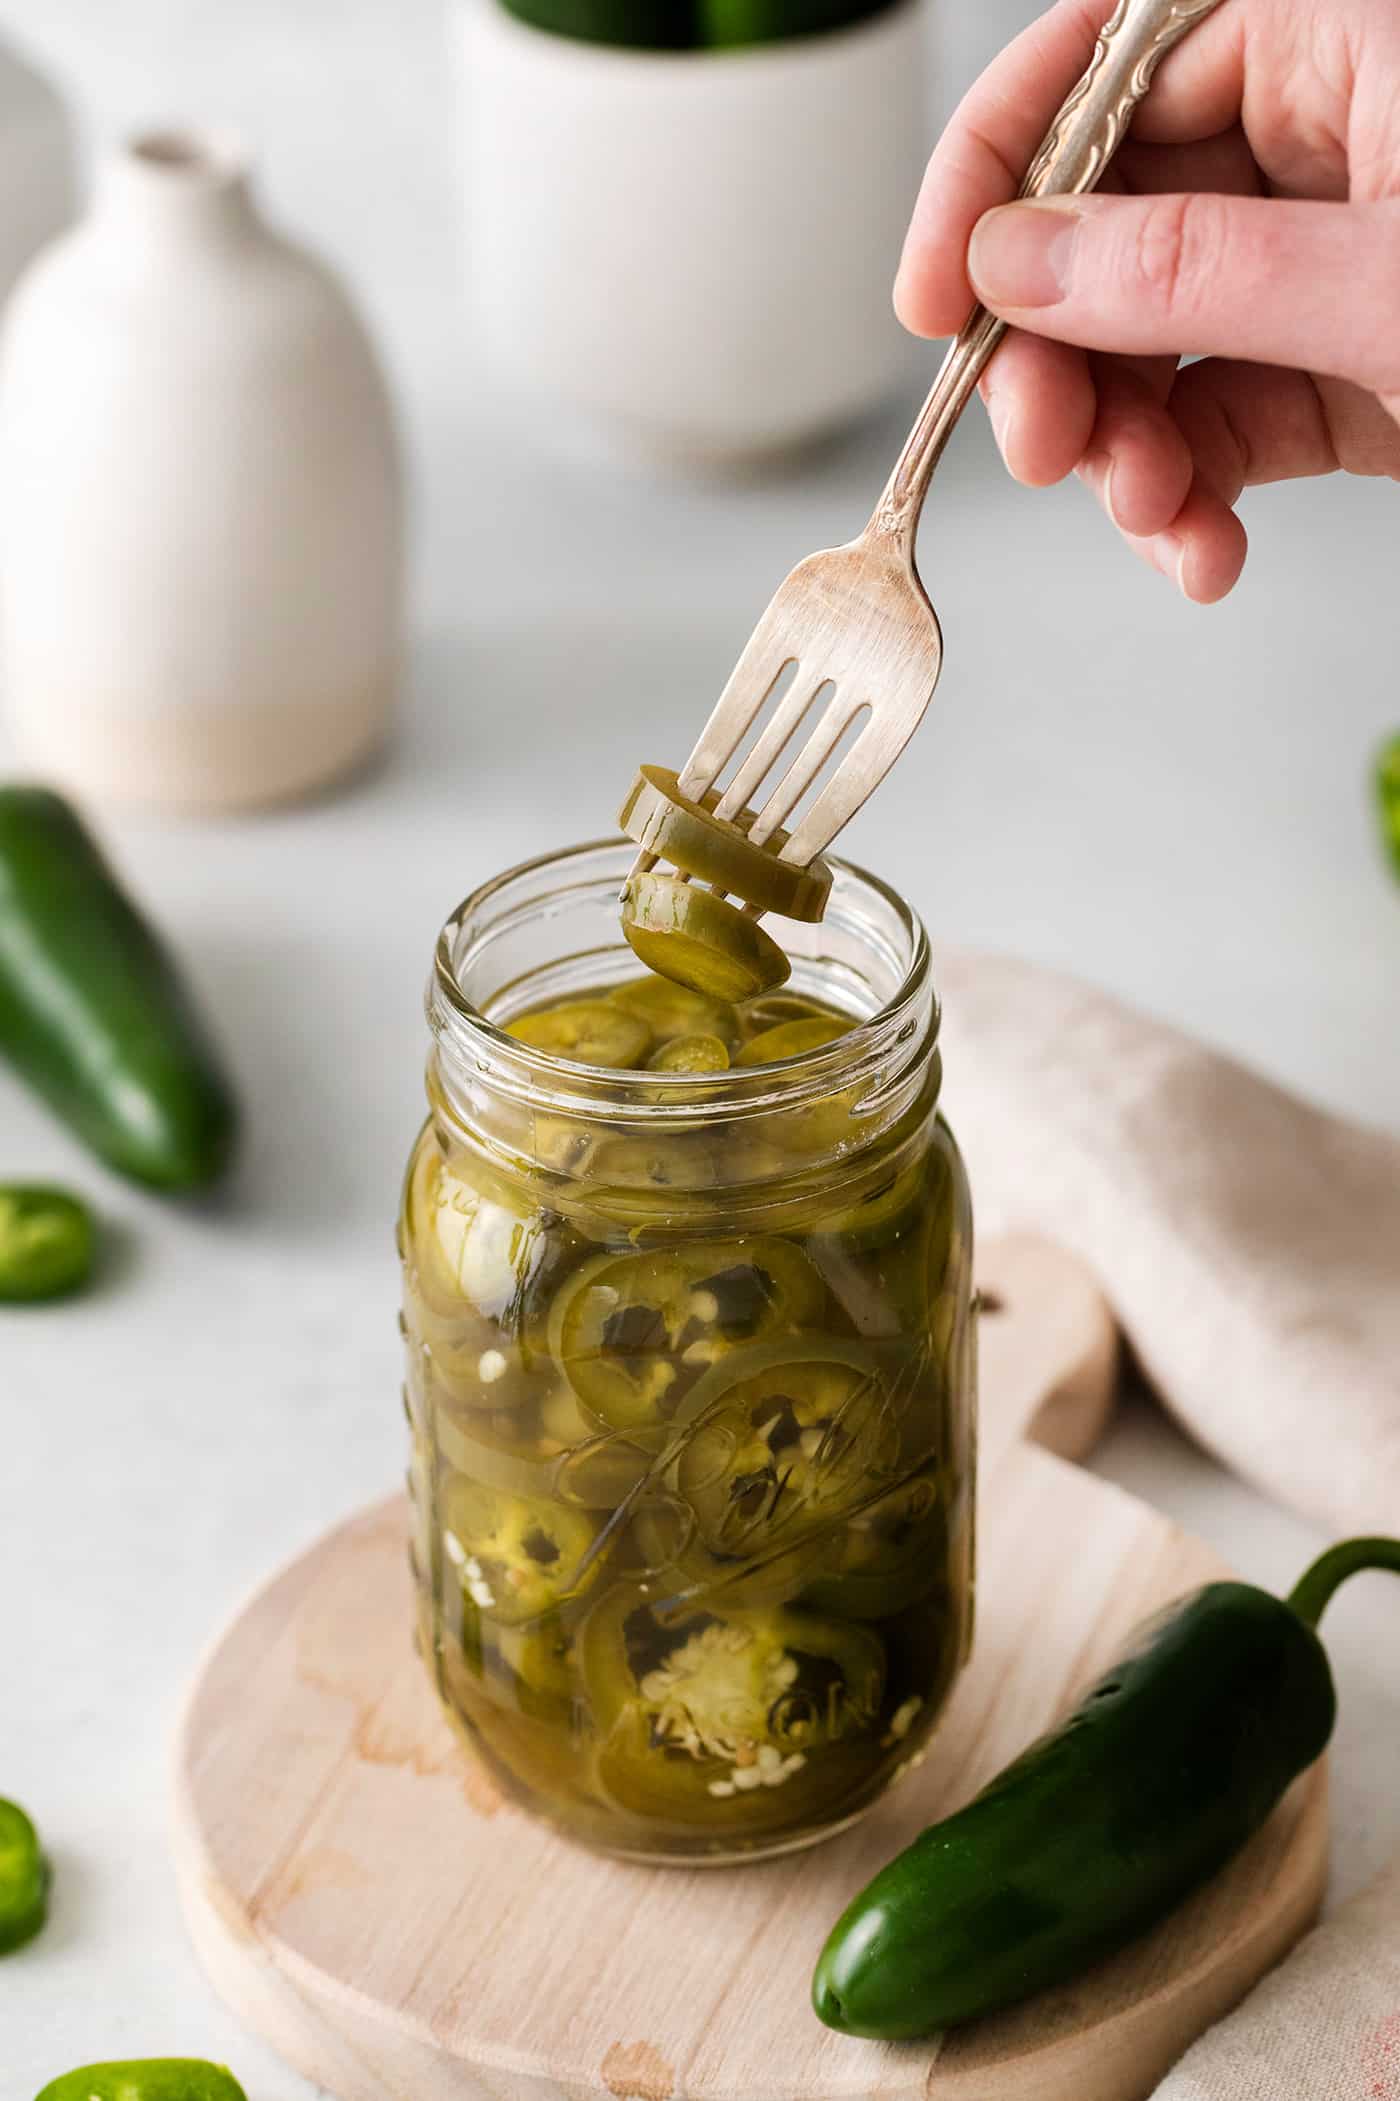 A fork pulling a jalapeno slice from a jar